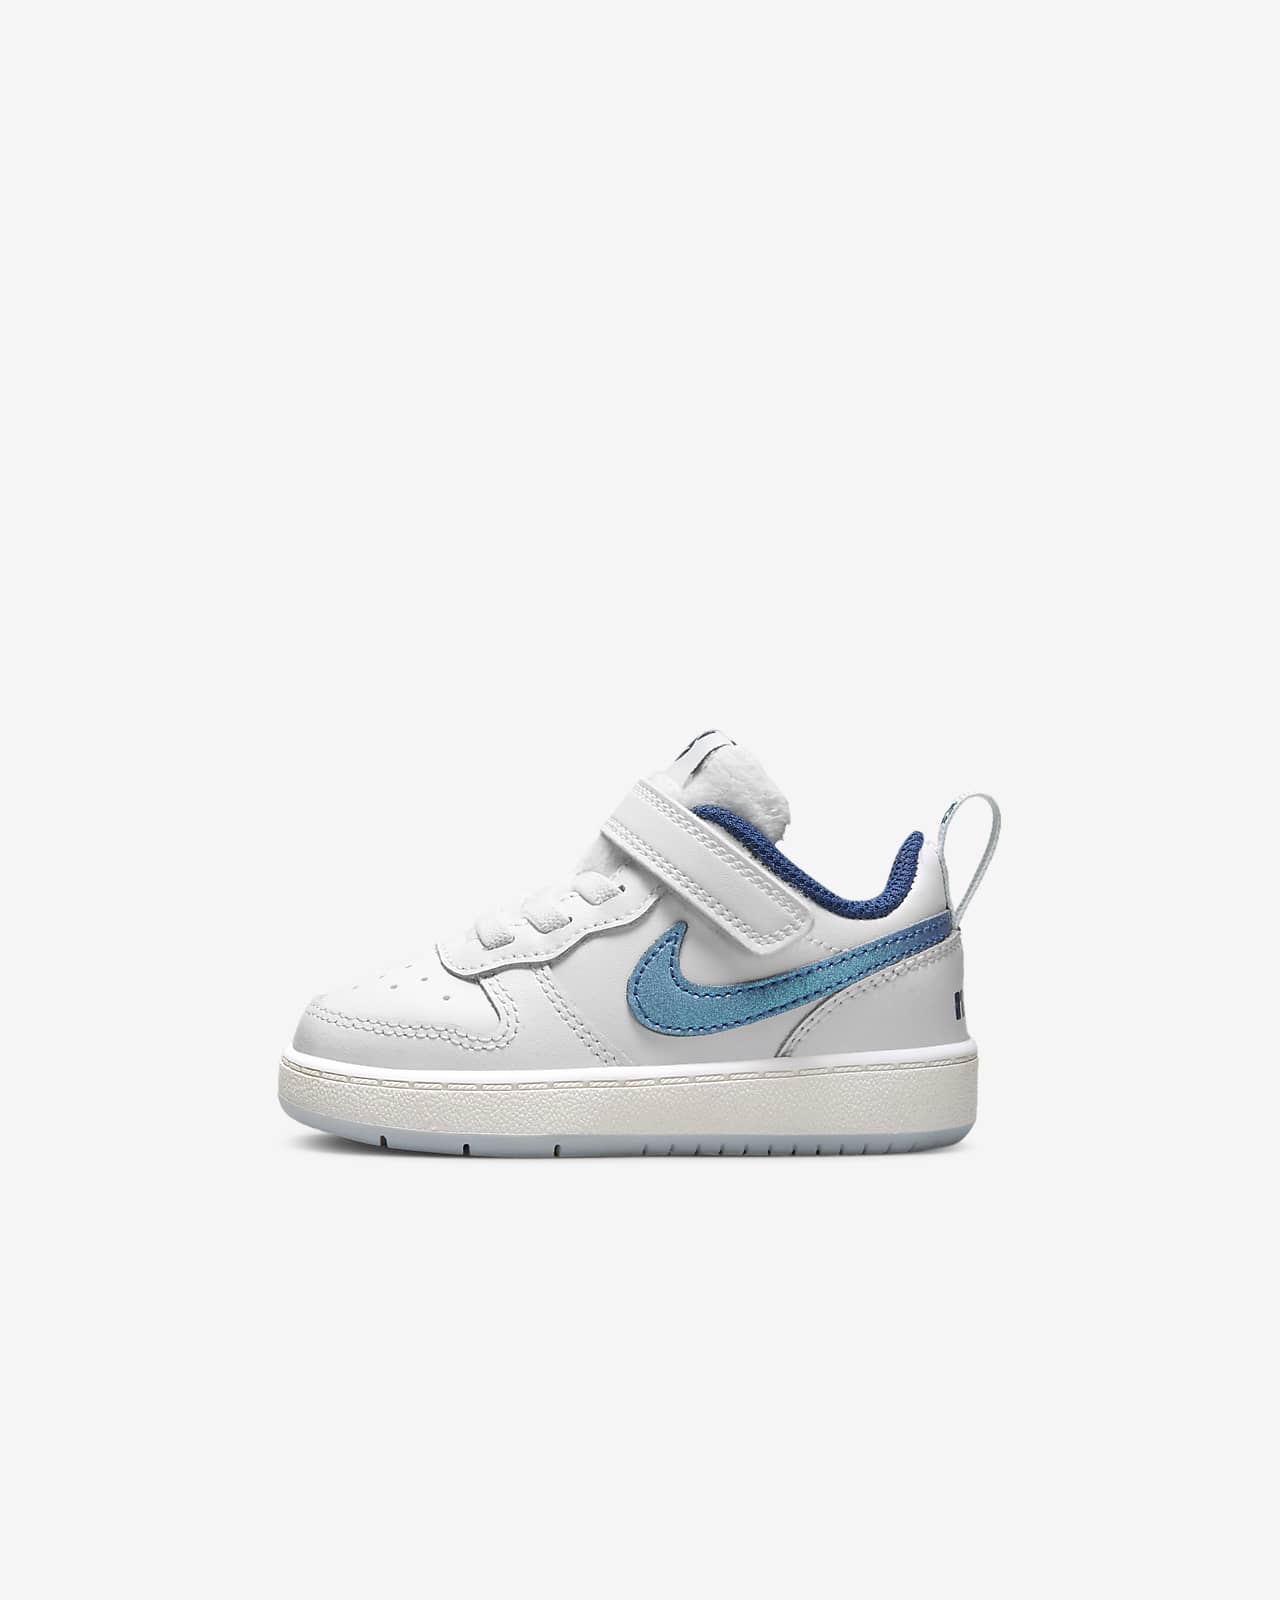 end point Recur Flat Nike Court Borough Low 2 SE Baby/Toddler Shoes. Nike.com